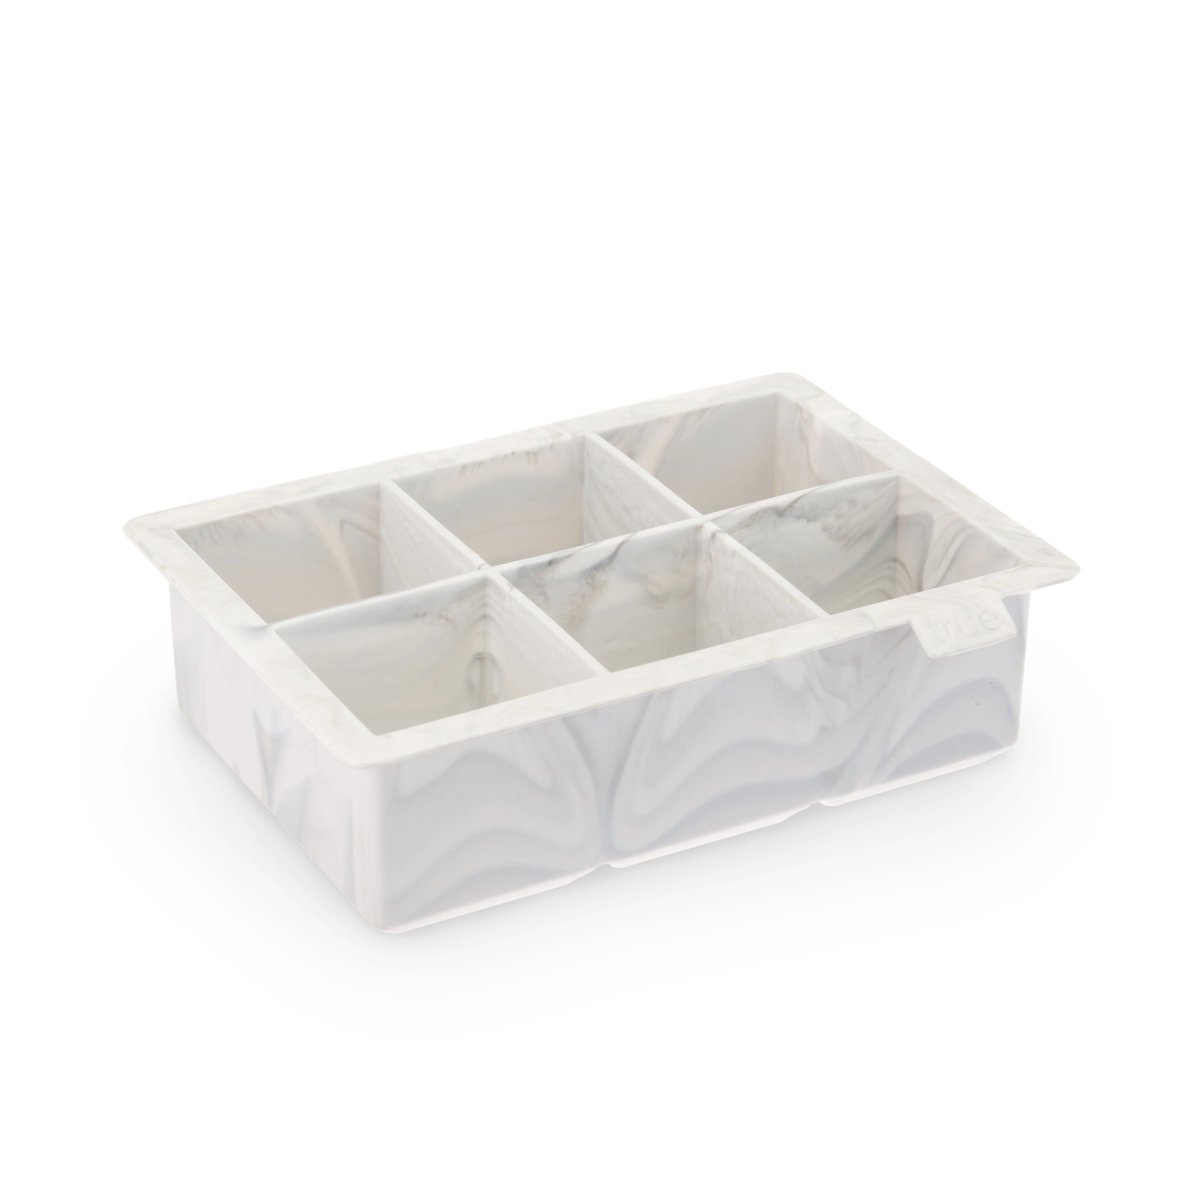 https://cdn.shopify.com/s/files/1/0275/1876/3088/products/marbled-silicone-ice-cube-tray-660509_1445x.jpg?v=1666388759